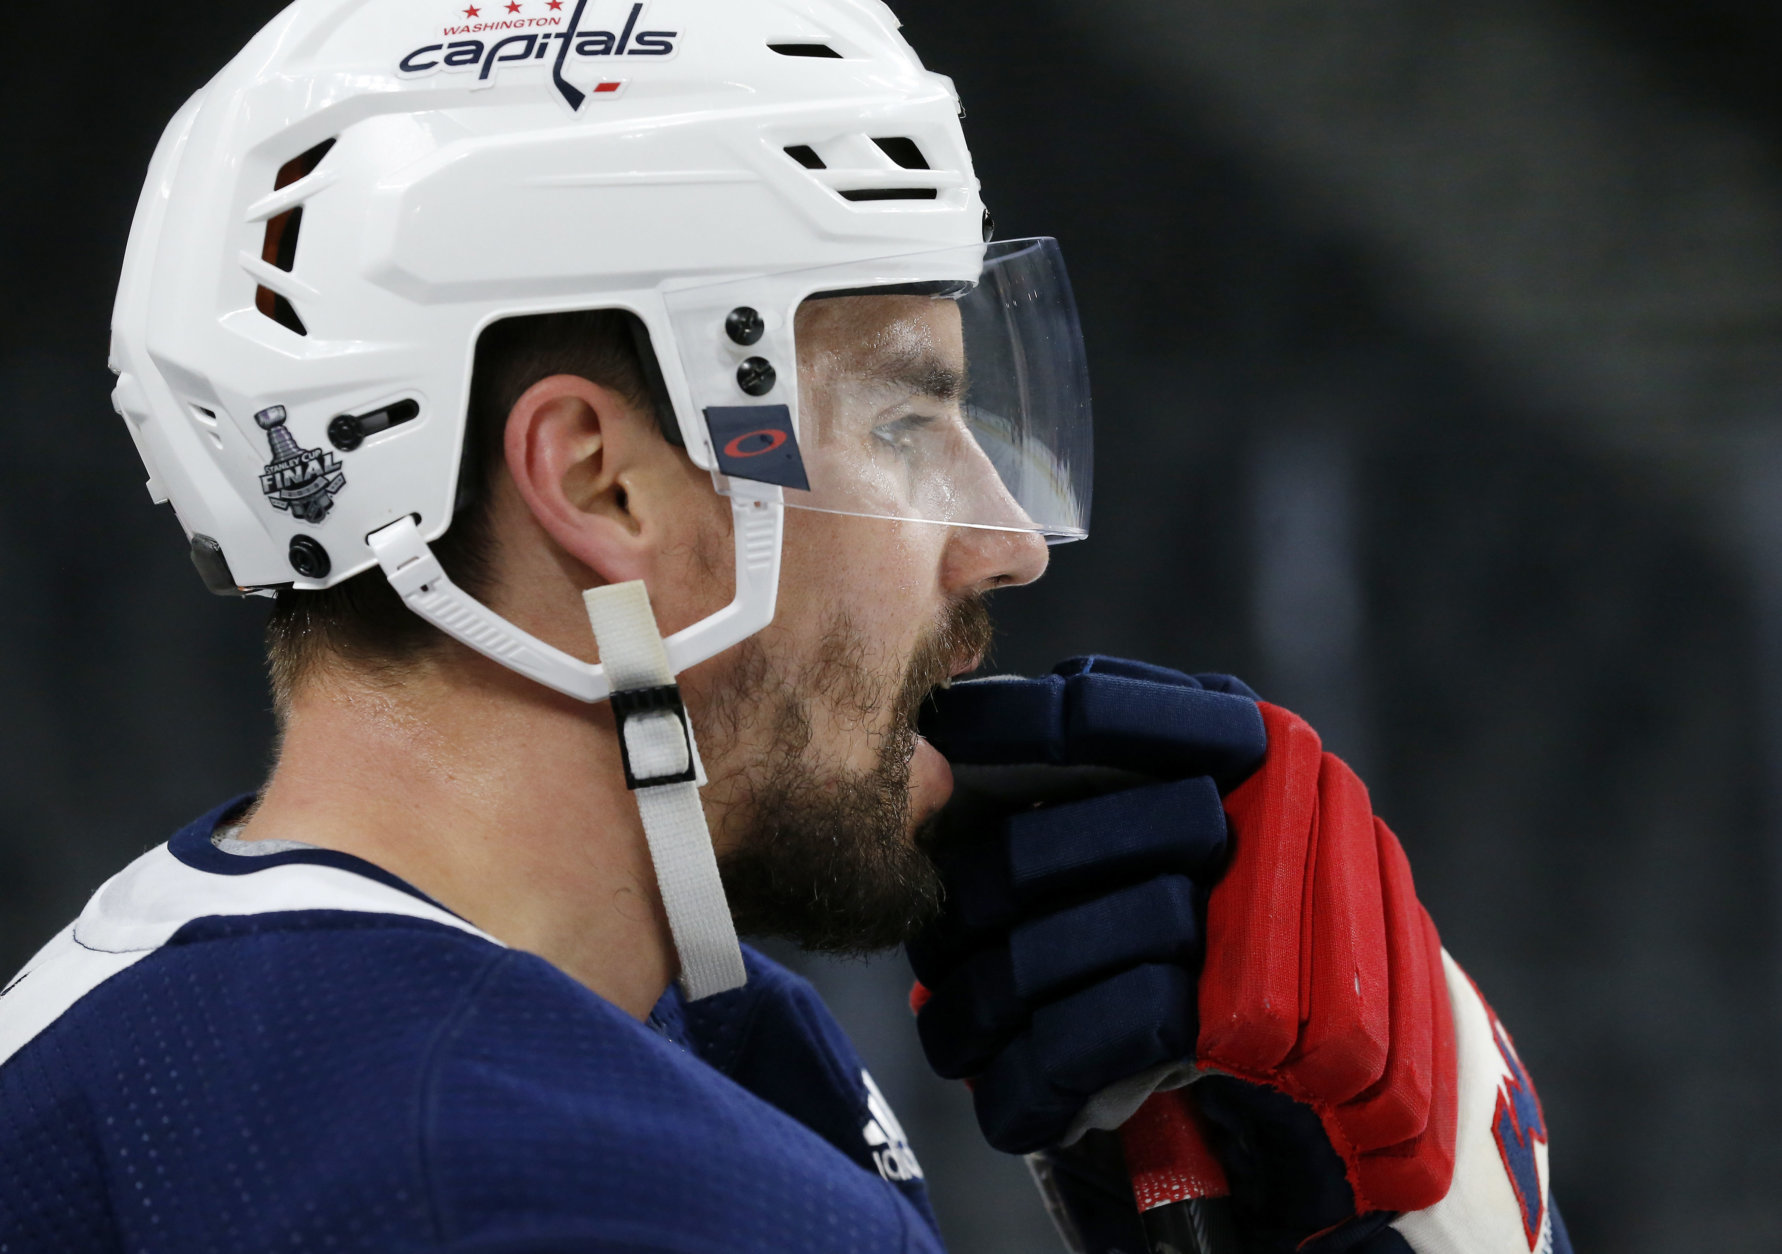 Washington Capitals defenseman Matt Niskanen stands on the ice during practice Tuesday, May 29, 2018, in Las Vegas. Game 2 of the Stanley Cup NHL hockey finals between the Capitals and the Vegas Golden Knights is scheduled for Wednesday. (AP Photo/Ross D. Franklin)